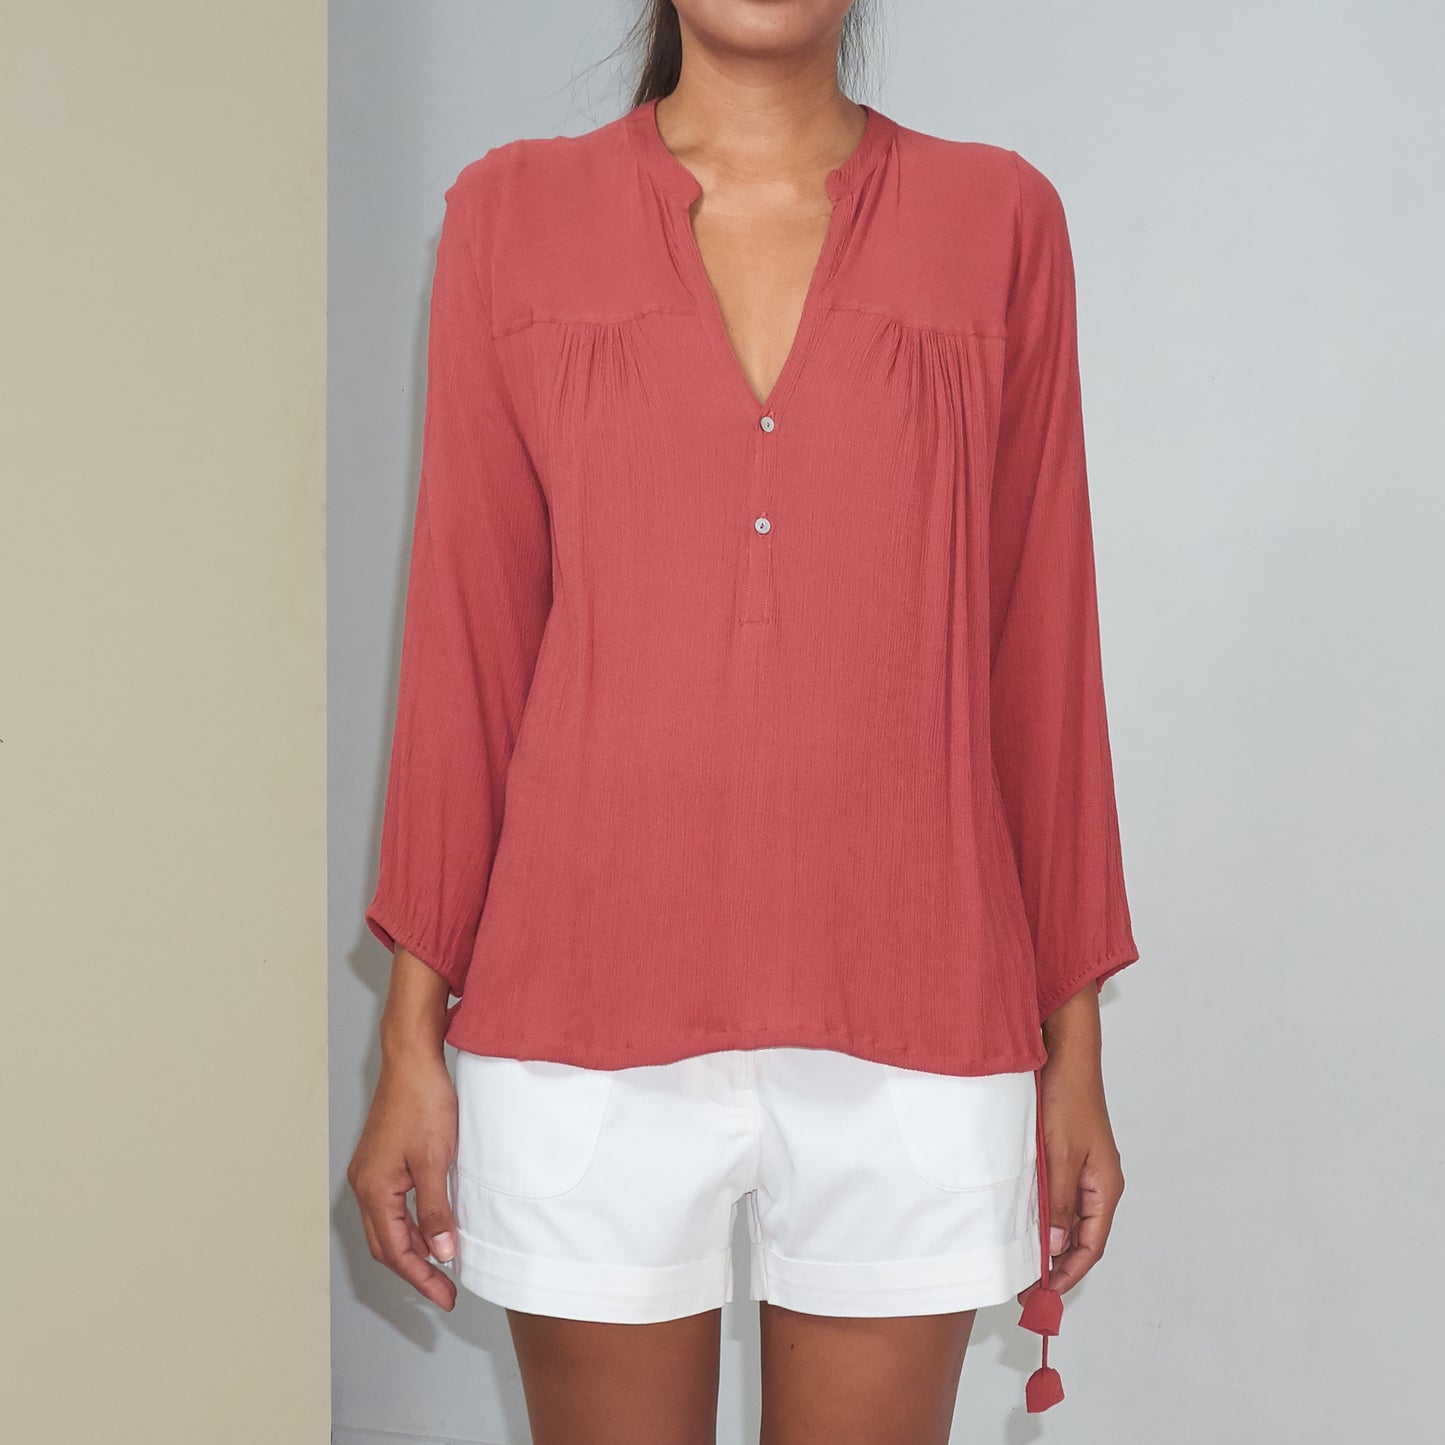 BKLN TOP - Crinkled Rayon | Dusty Rose